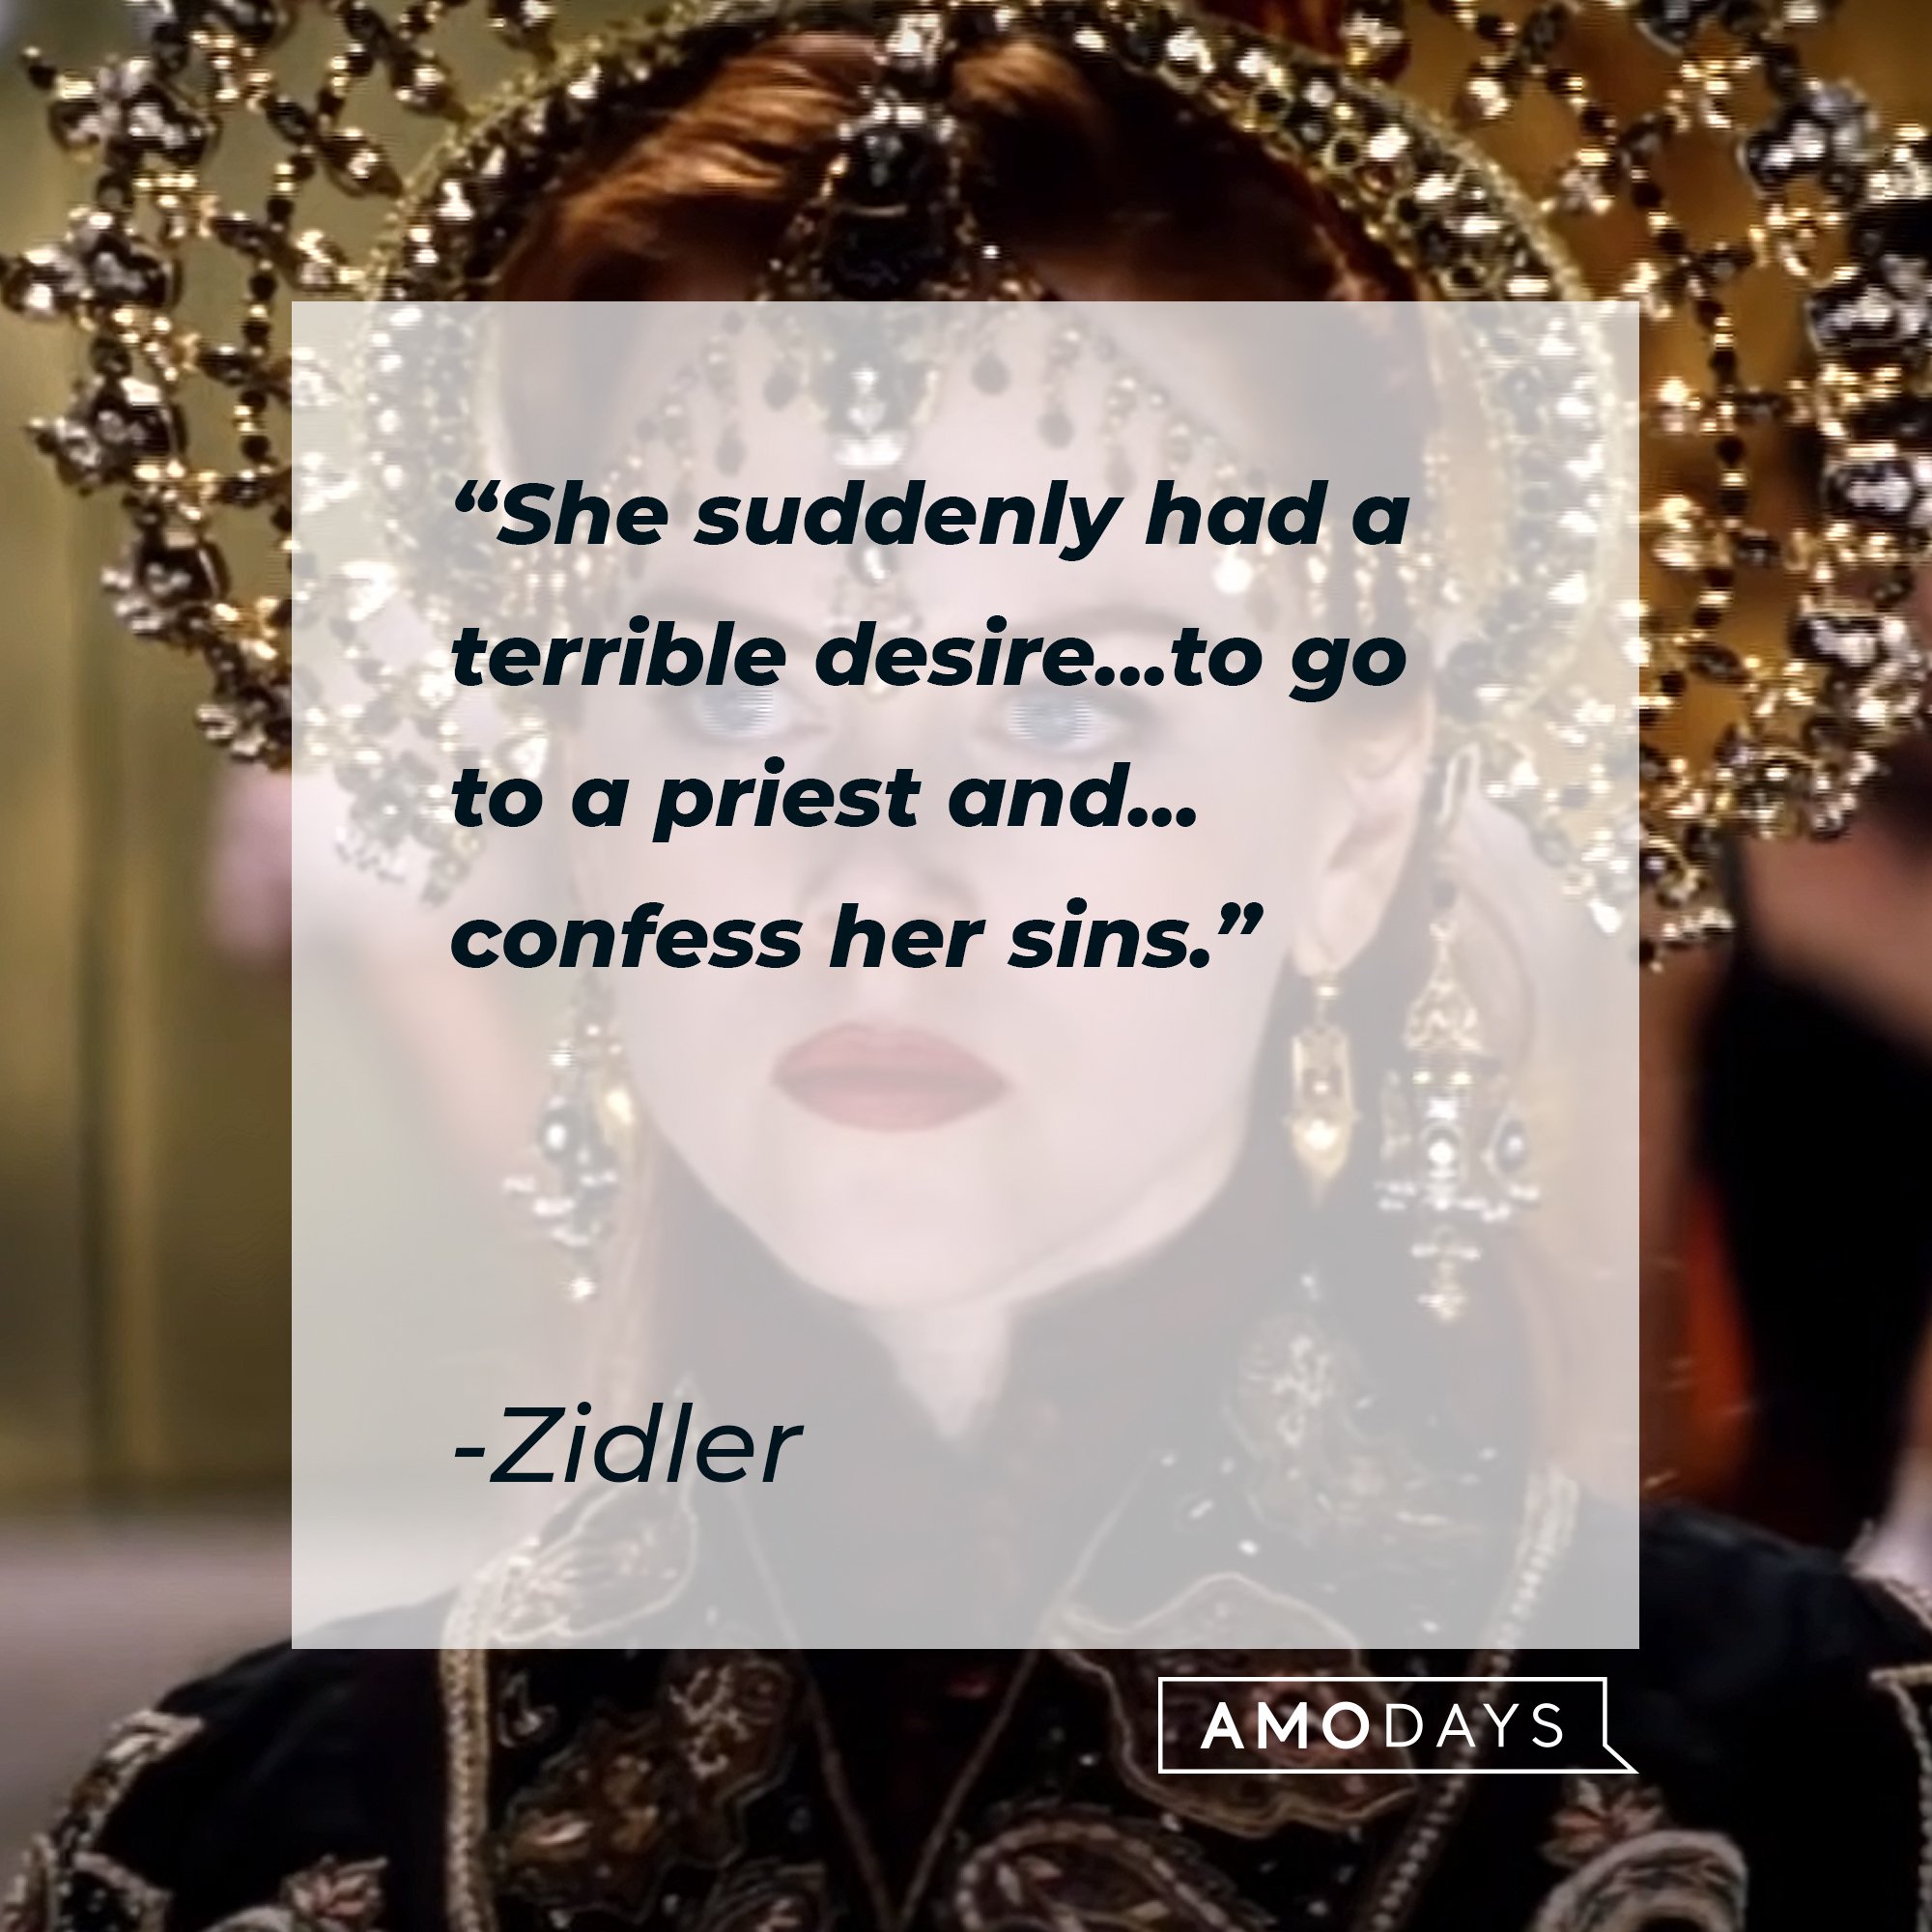 Zidler's quote: "She suddenly had a terrible desire...to go to a priest and...confess her sins." | Image: AmoDays